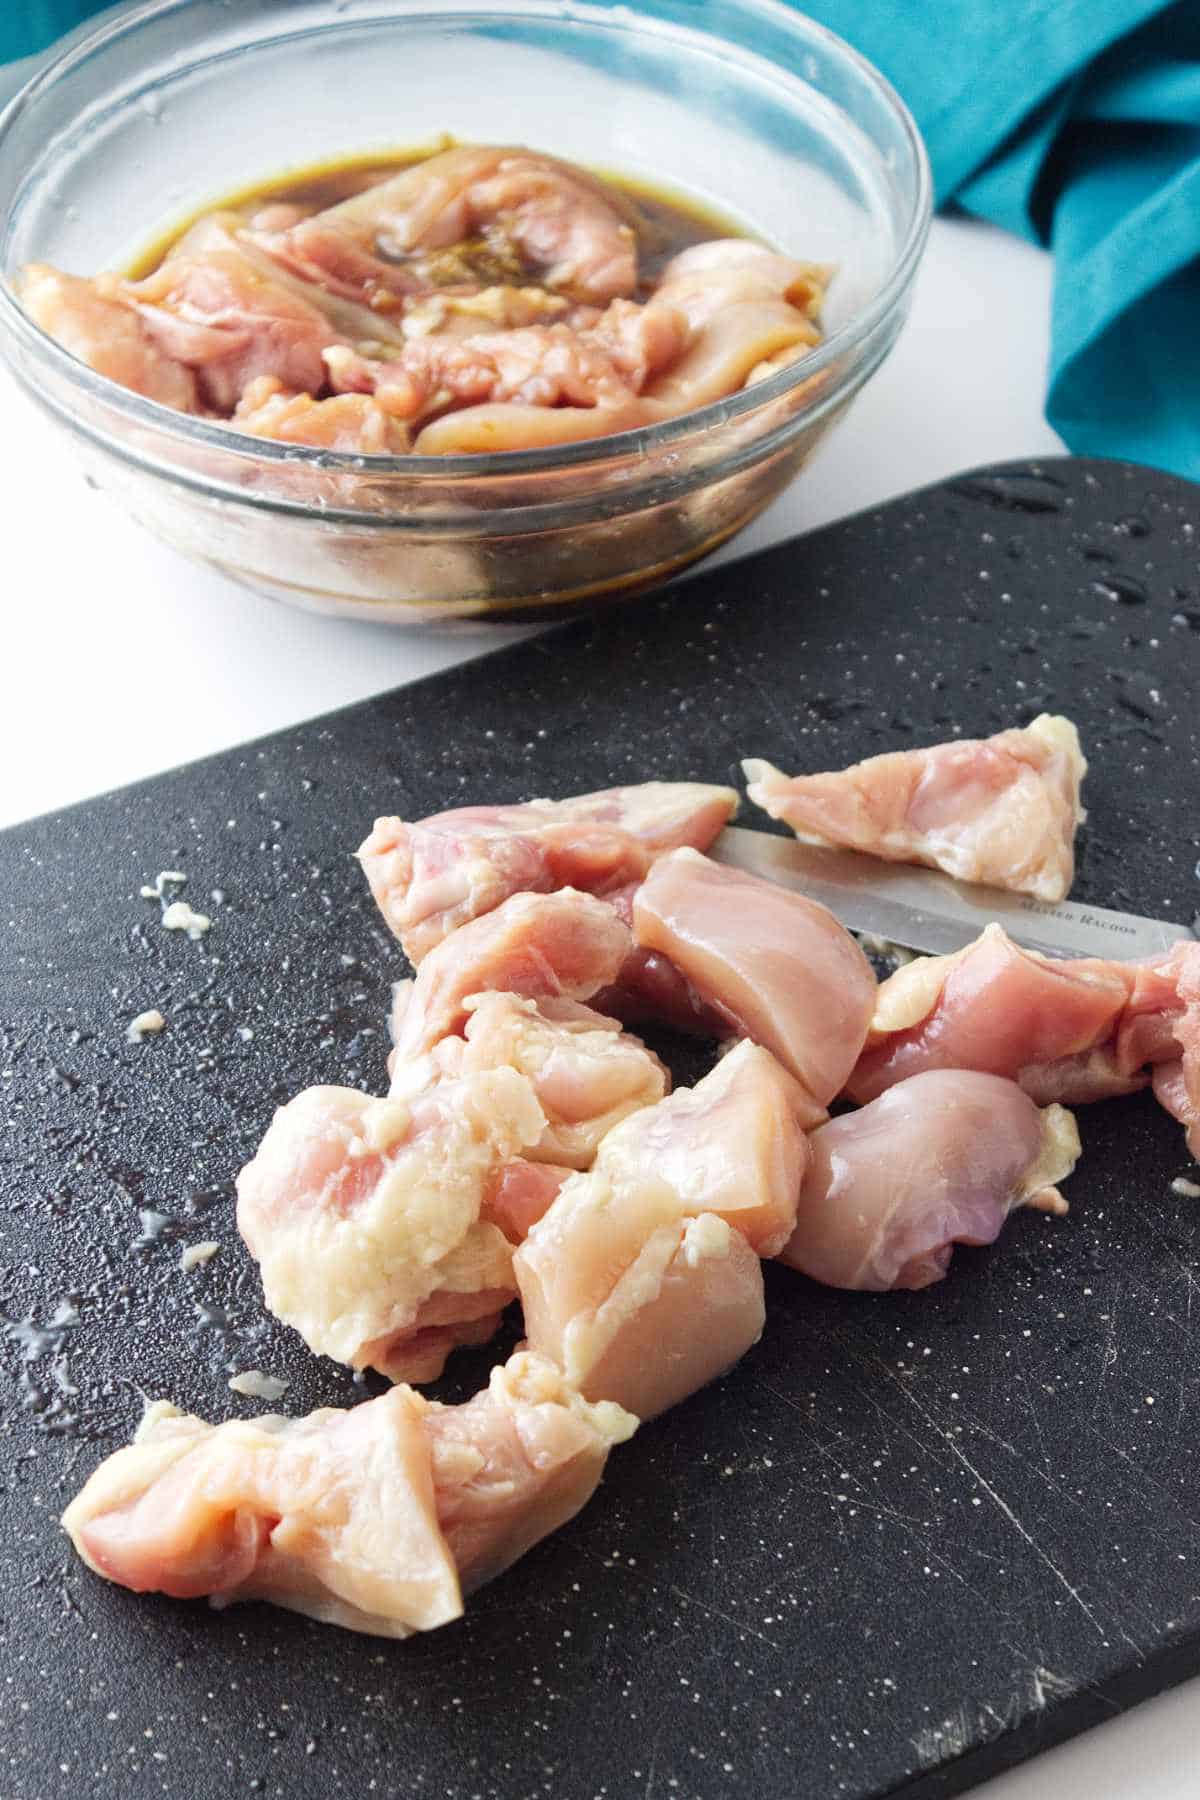 bowl of cut up chicken thighs in a bowl and on cutting board.